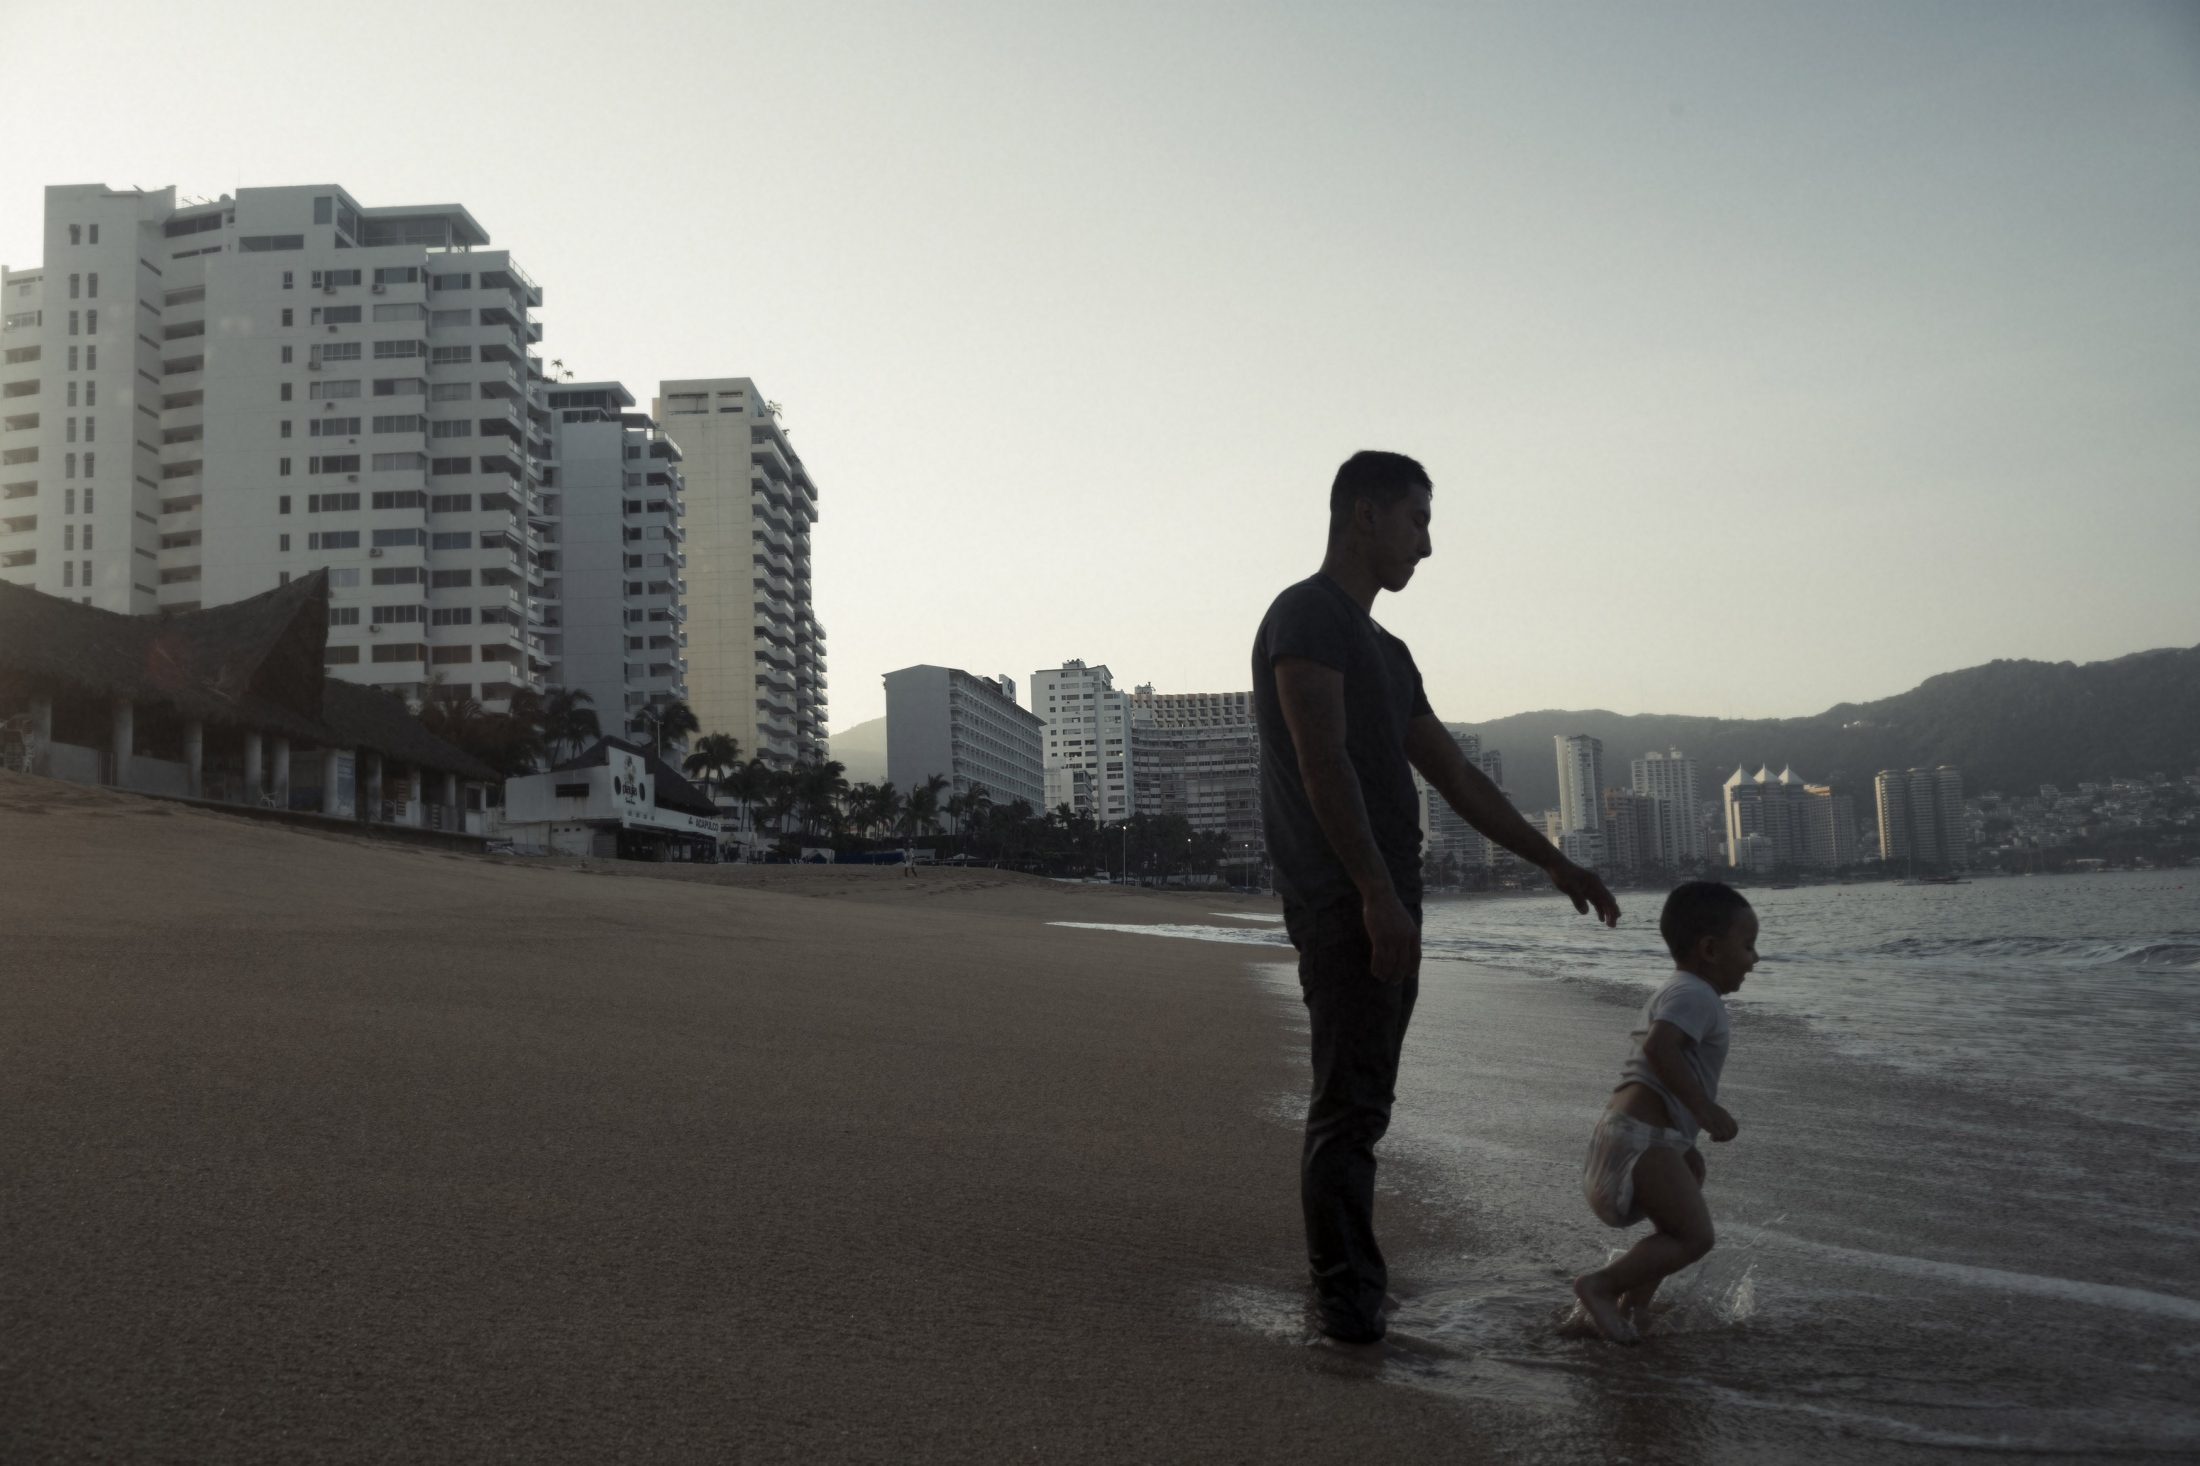 Andres Vladimir, who was visiting Acapulco from Mexico City, introduces his 3-year-old son Harek to the sea. &nbsp;Many of those visiting Acapulco&#39;s shores, especially those with extensive tattooing that could be associated with gang affiliation like Andres, visit the shores in the early hours of the day to avoid possible confrontations which could arise at other times. &nbsp;A safer time, at dawn Andres didn&#39;t have to worry as much about murder.